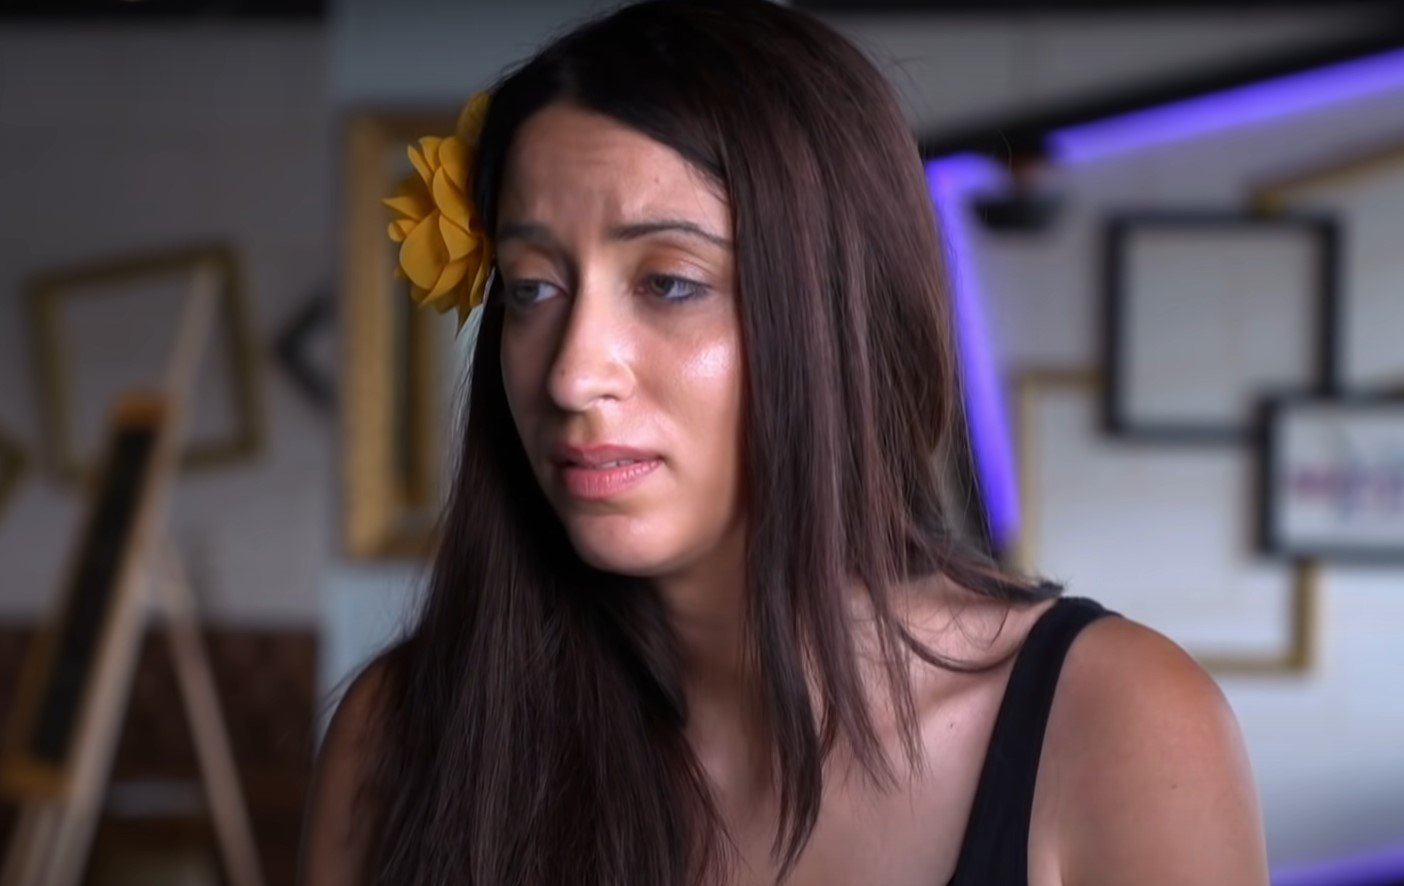 Amira and Andrew’s Mexican reunion didn’t go as planned on 90 Day Fiancé. 